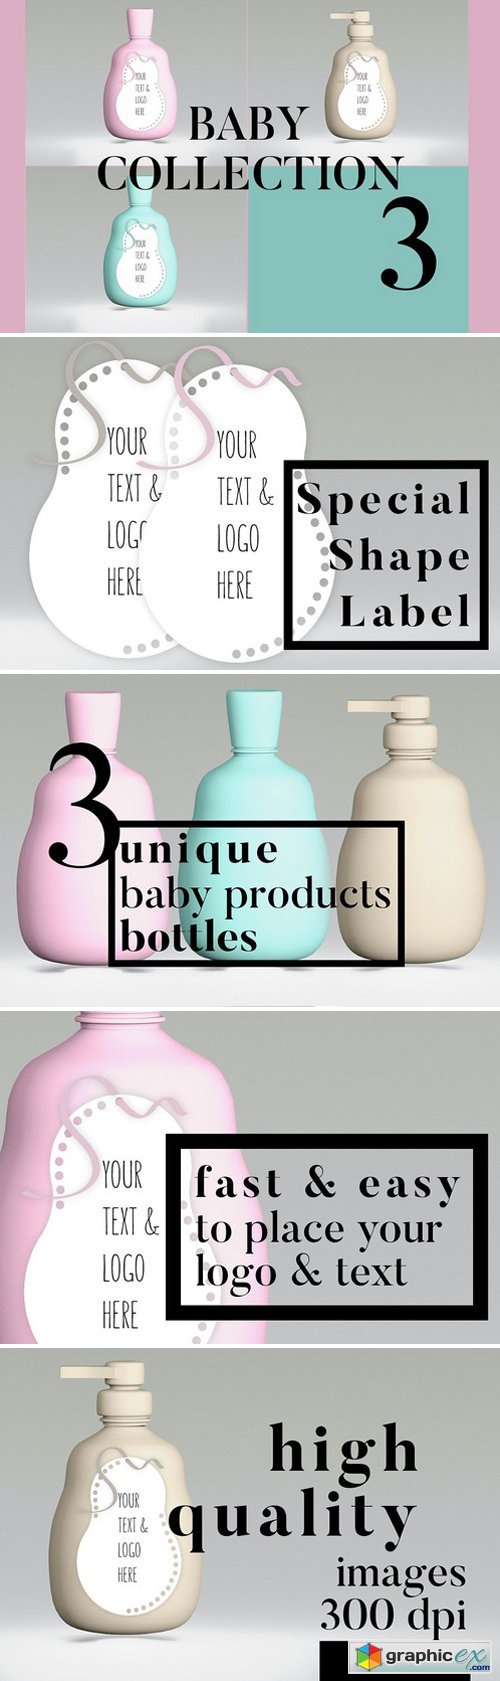 Baby products mockup